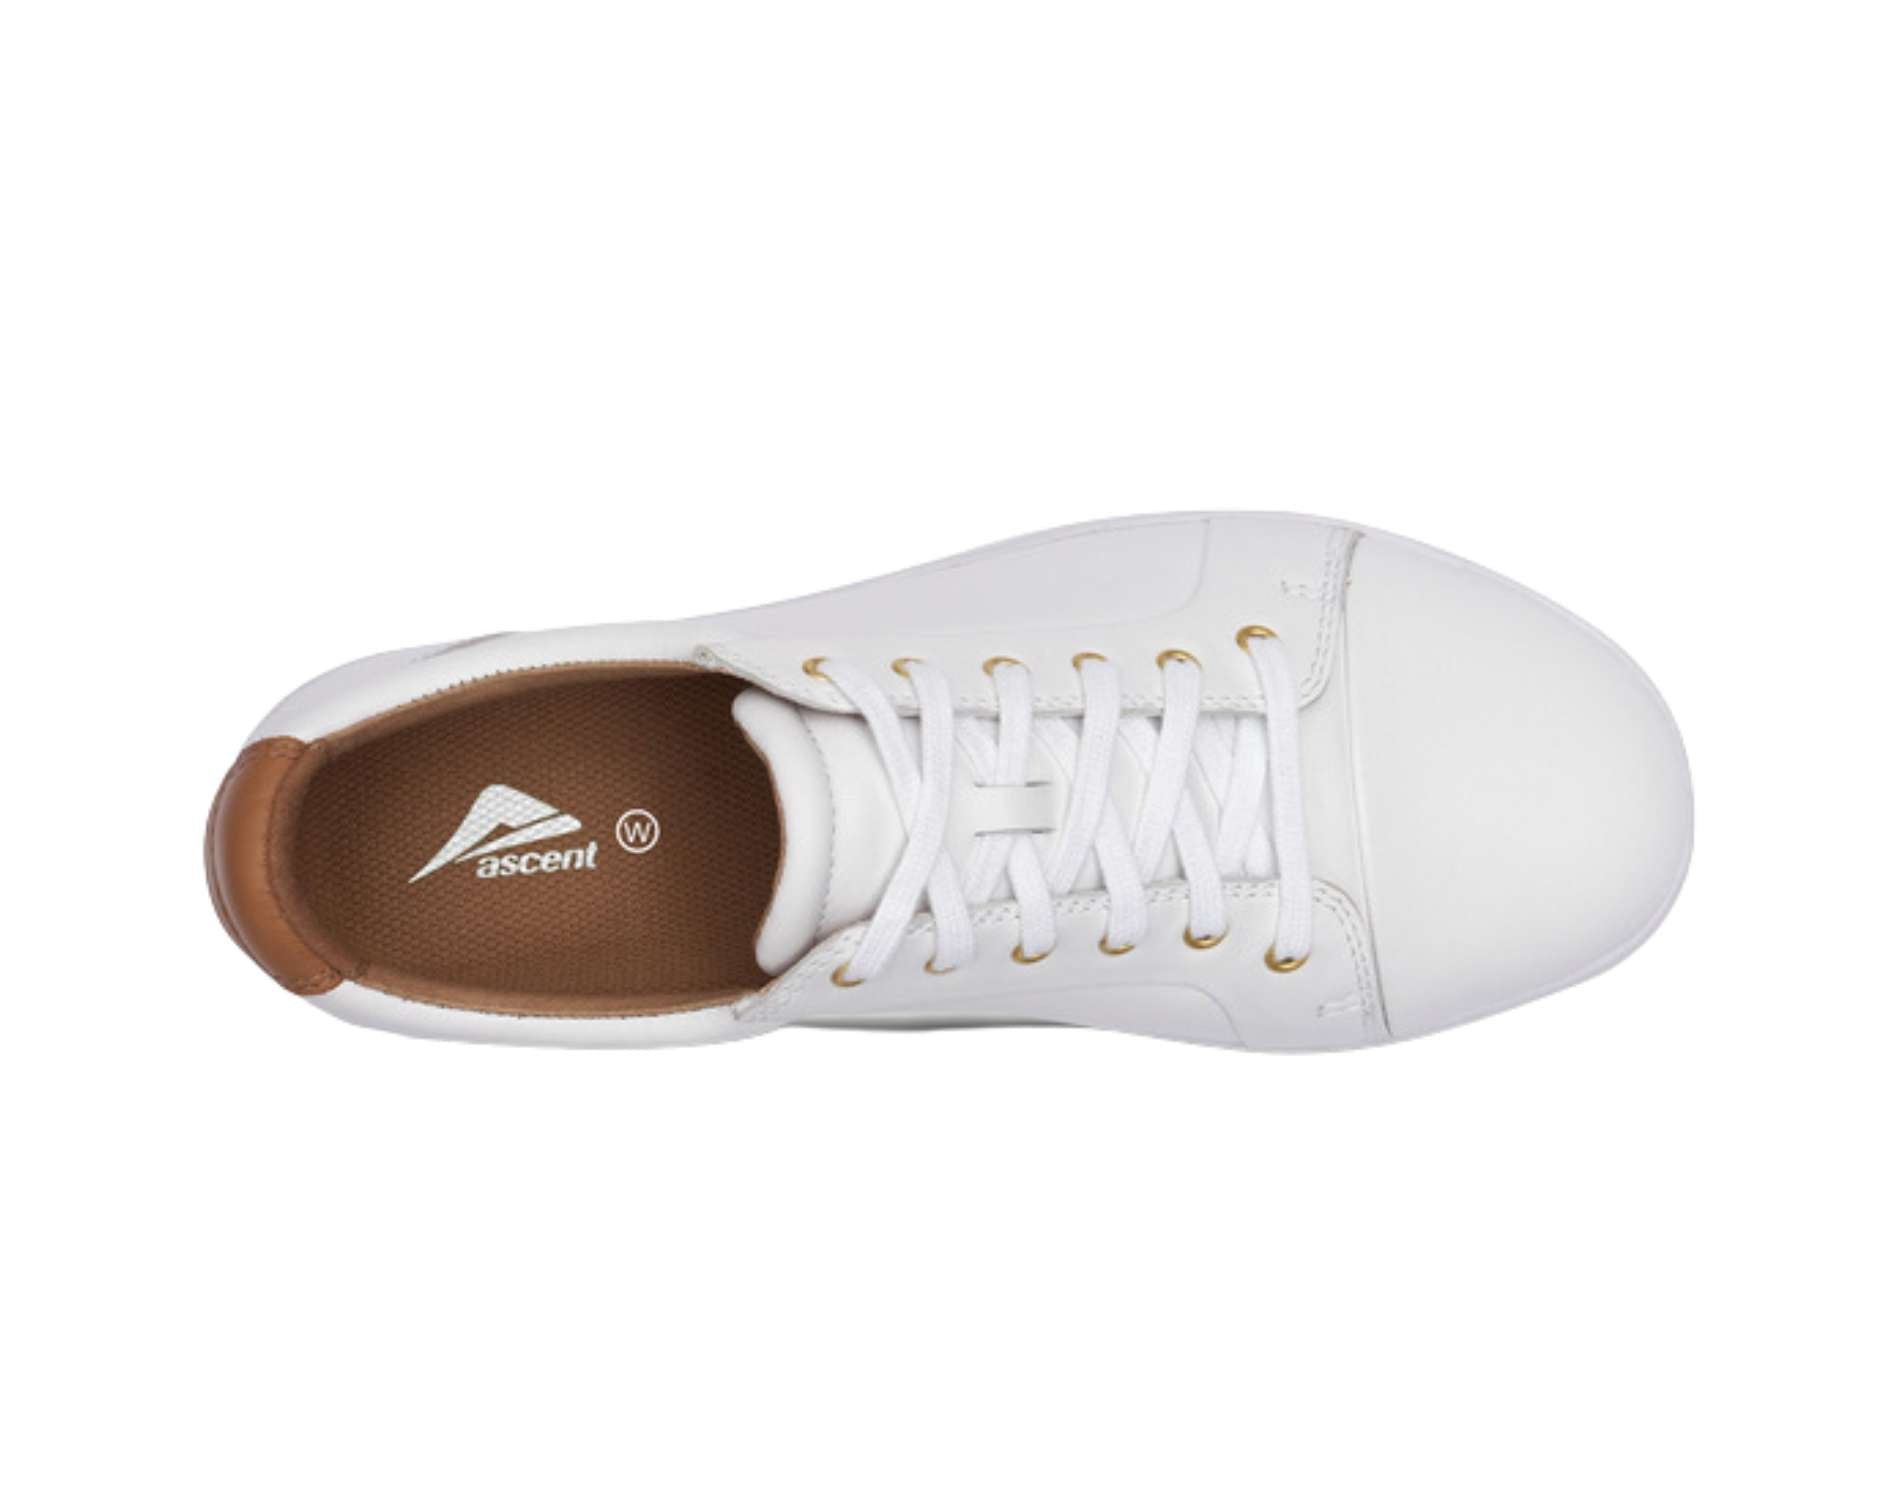 Ascent Stratus walking shoe in wide width and white colour